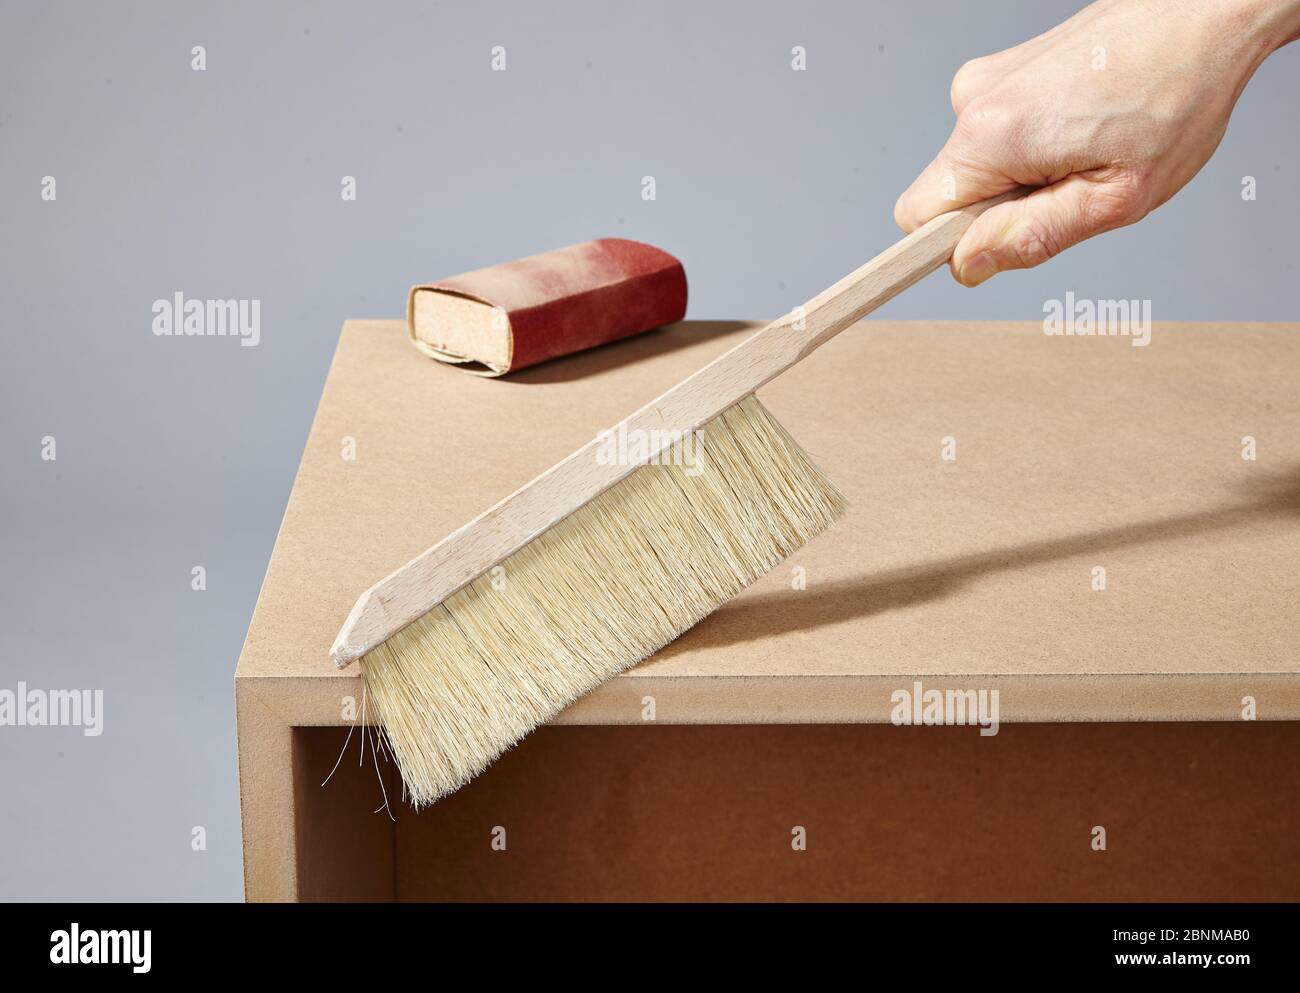 Construction of a shelf made of wood, Euro pallet, solid wood, MDF board; Do-it-yourself production, step-by-step, step 11 Clean the MDF body with a dust broom after sanding Stock Photo